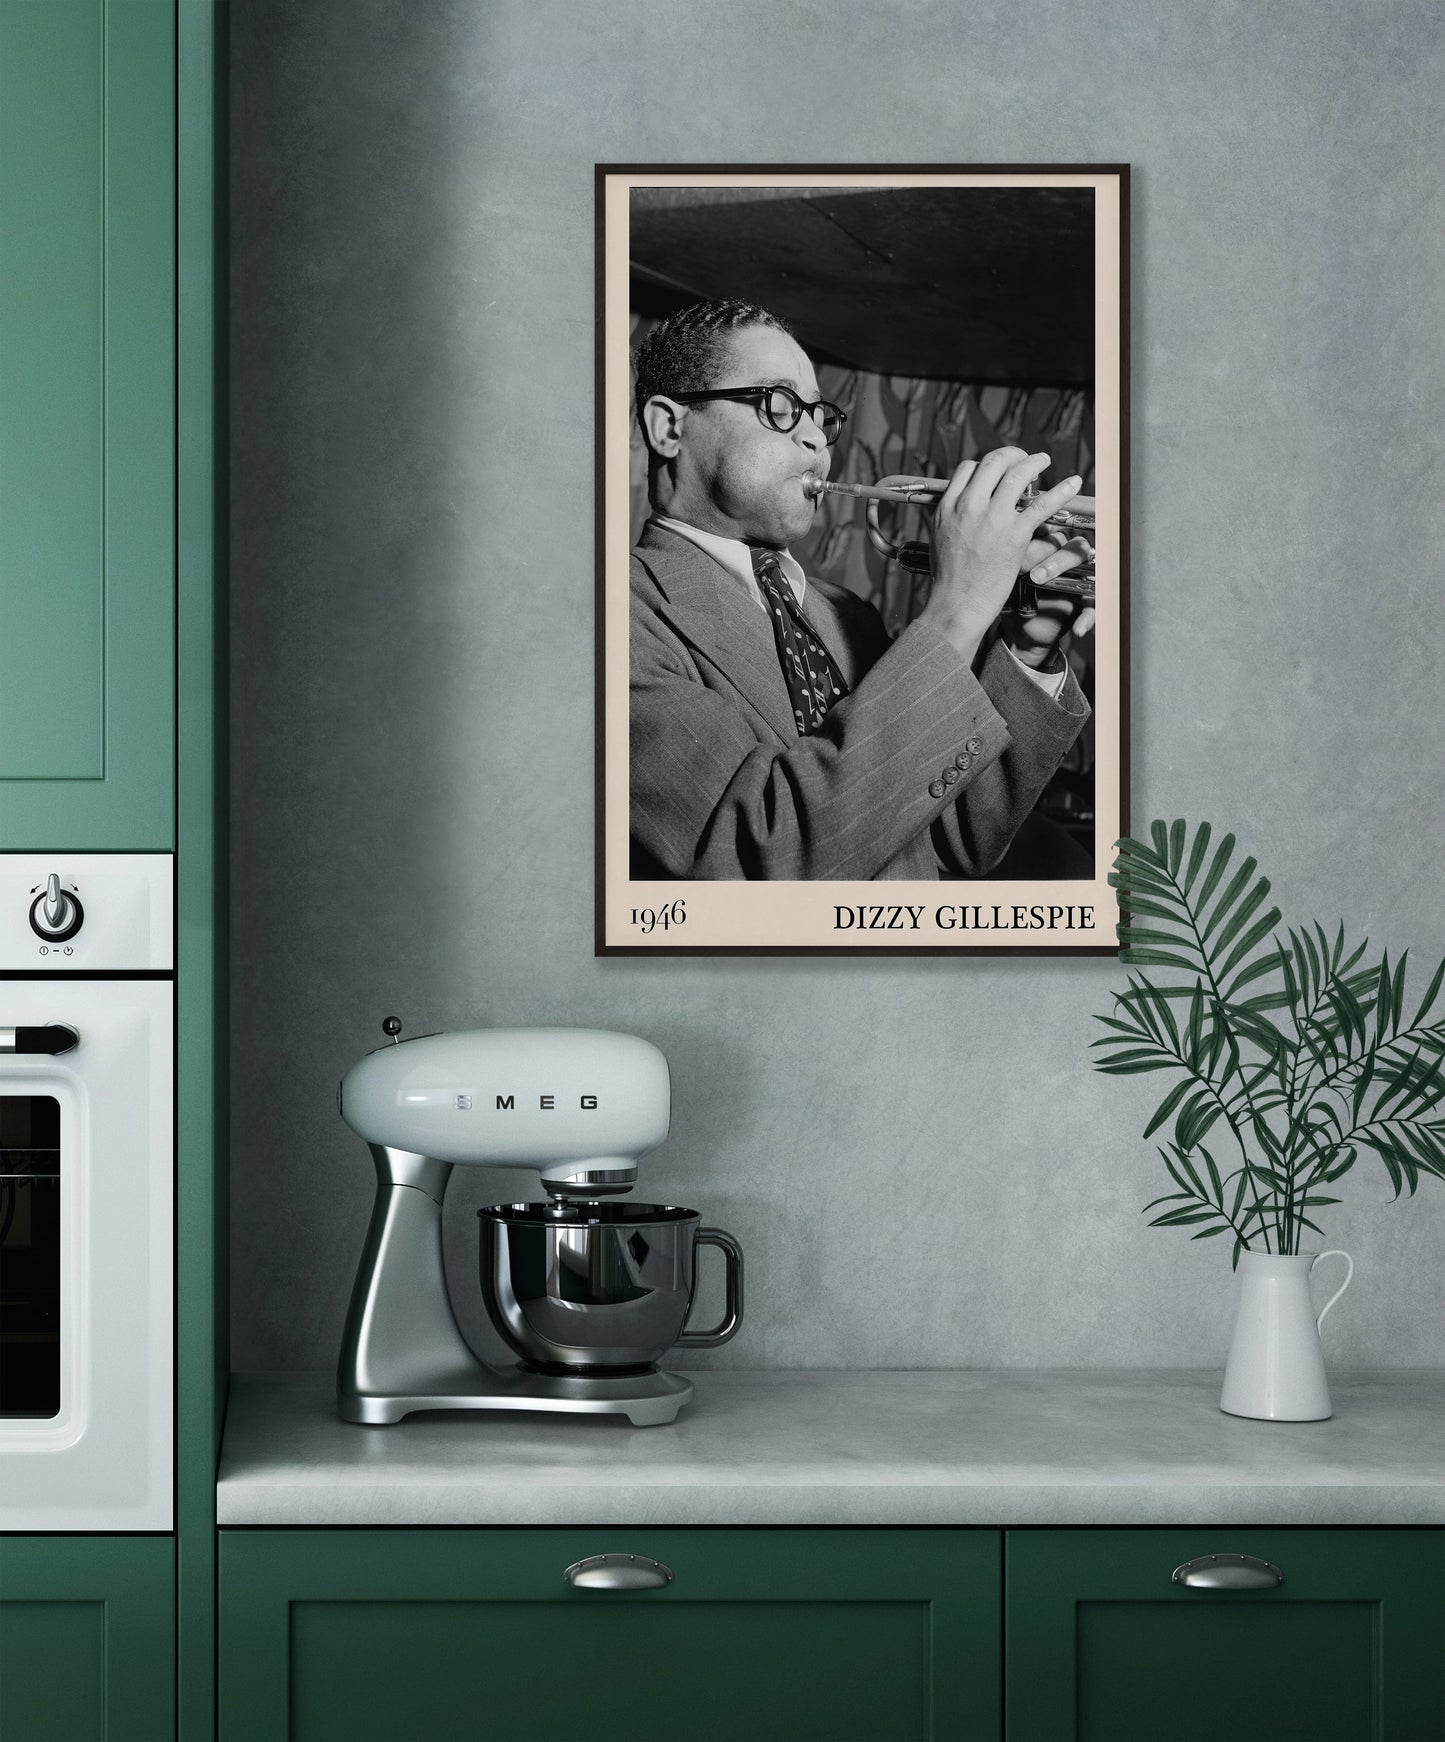 Cool 1946 photo of Dizzy Gillespie crafted into a framed music poster, hanging on kitchen wall